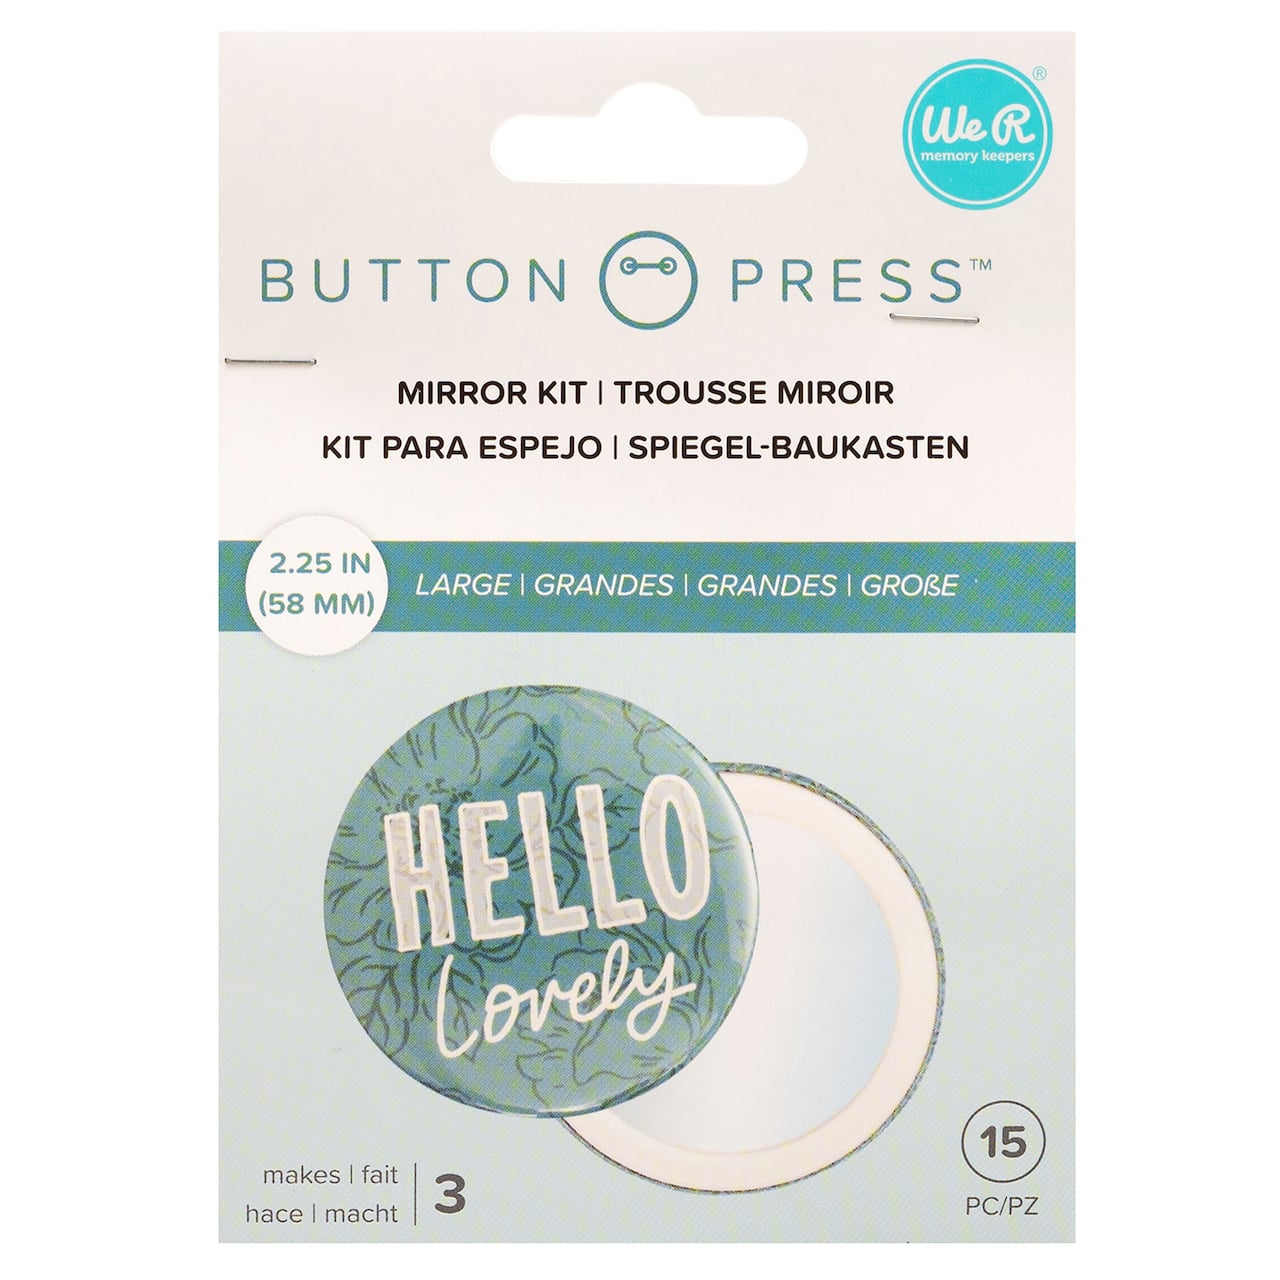 We R Memory Keepers® Button Press™ Large Mirror Kit